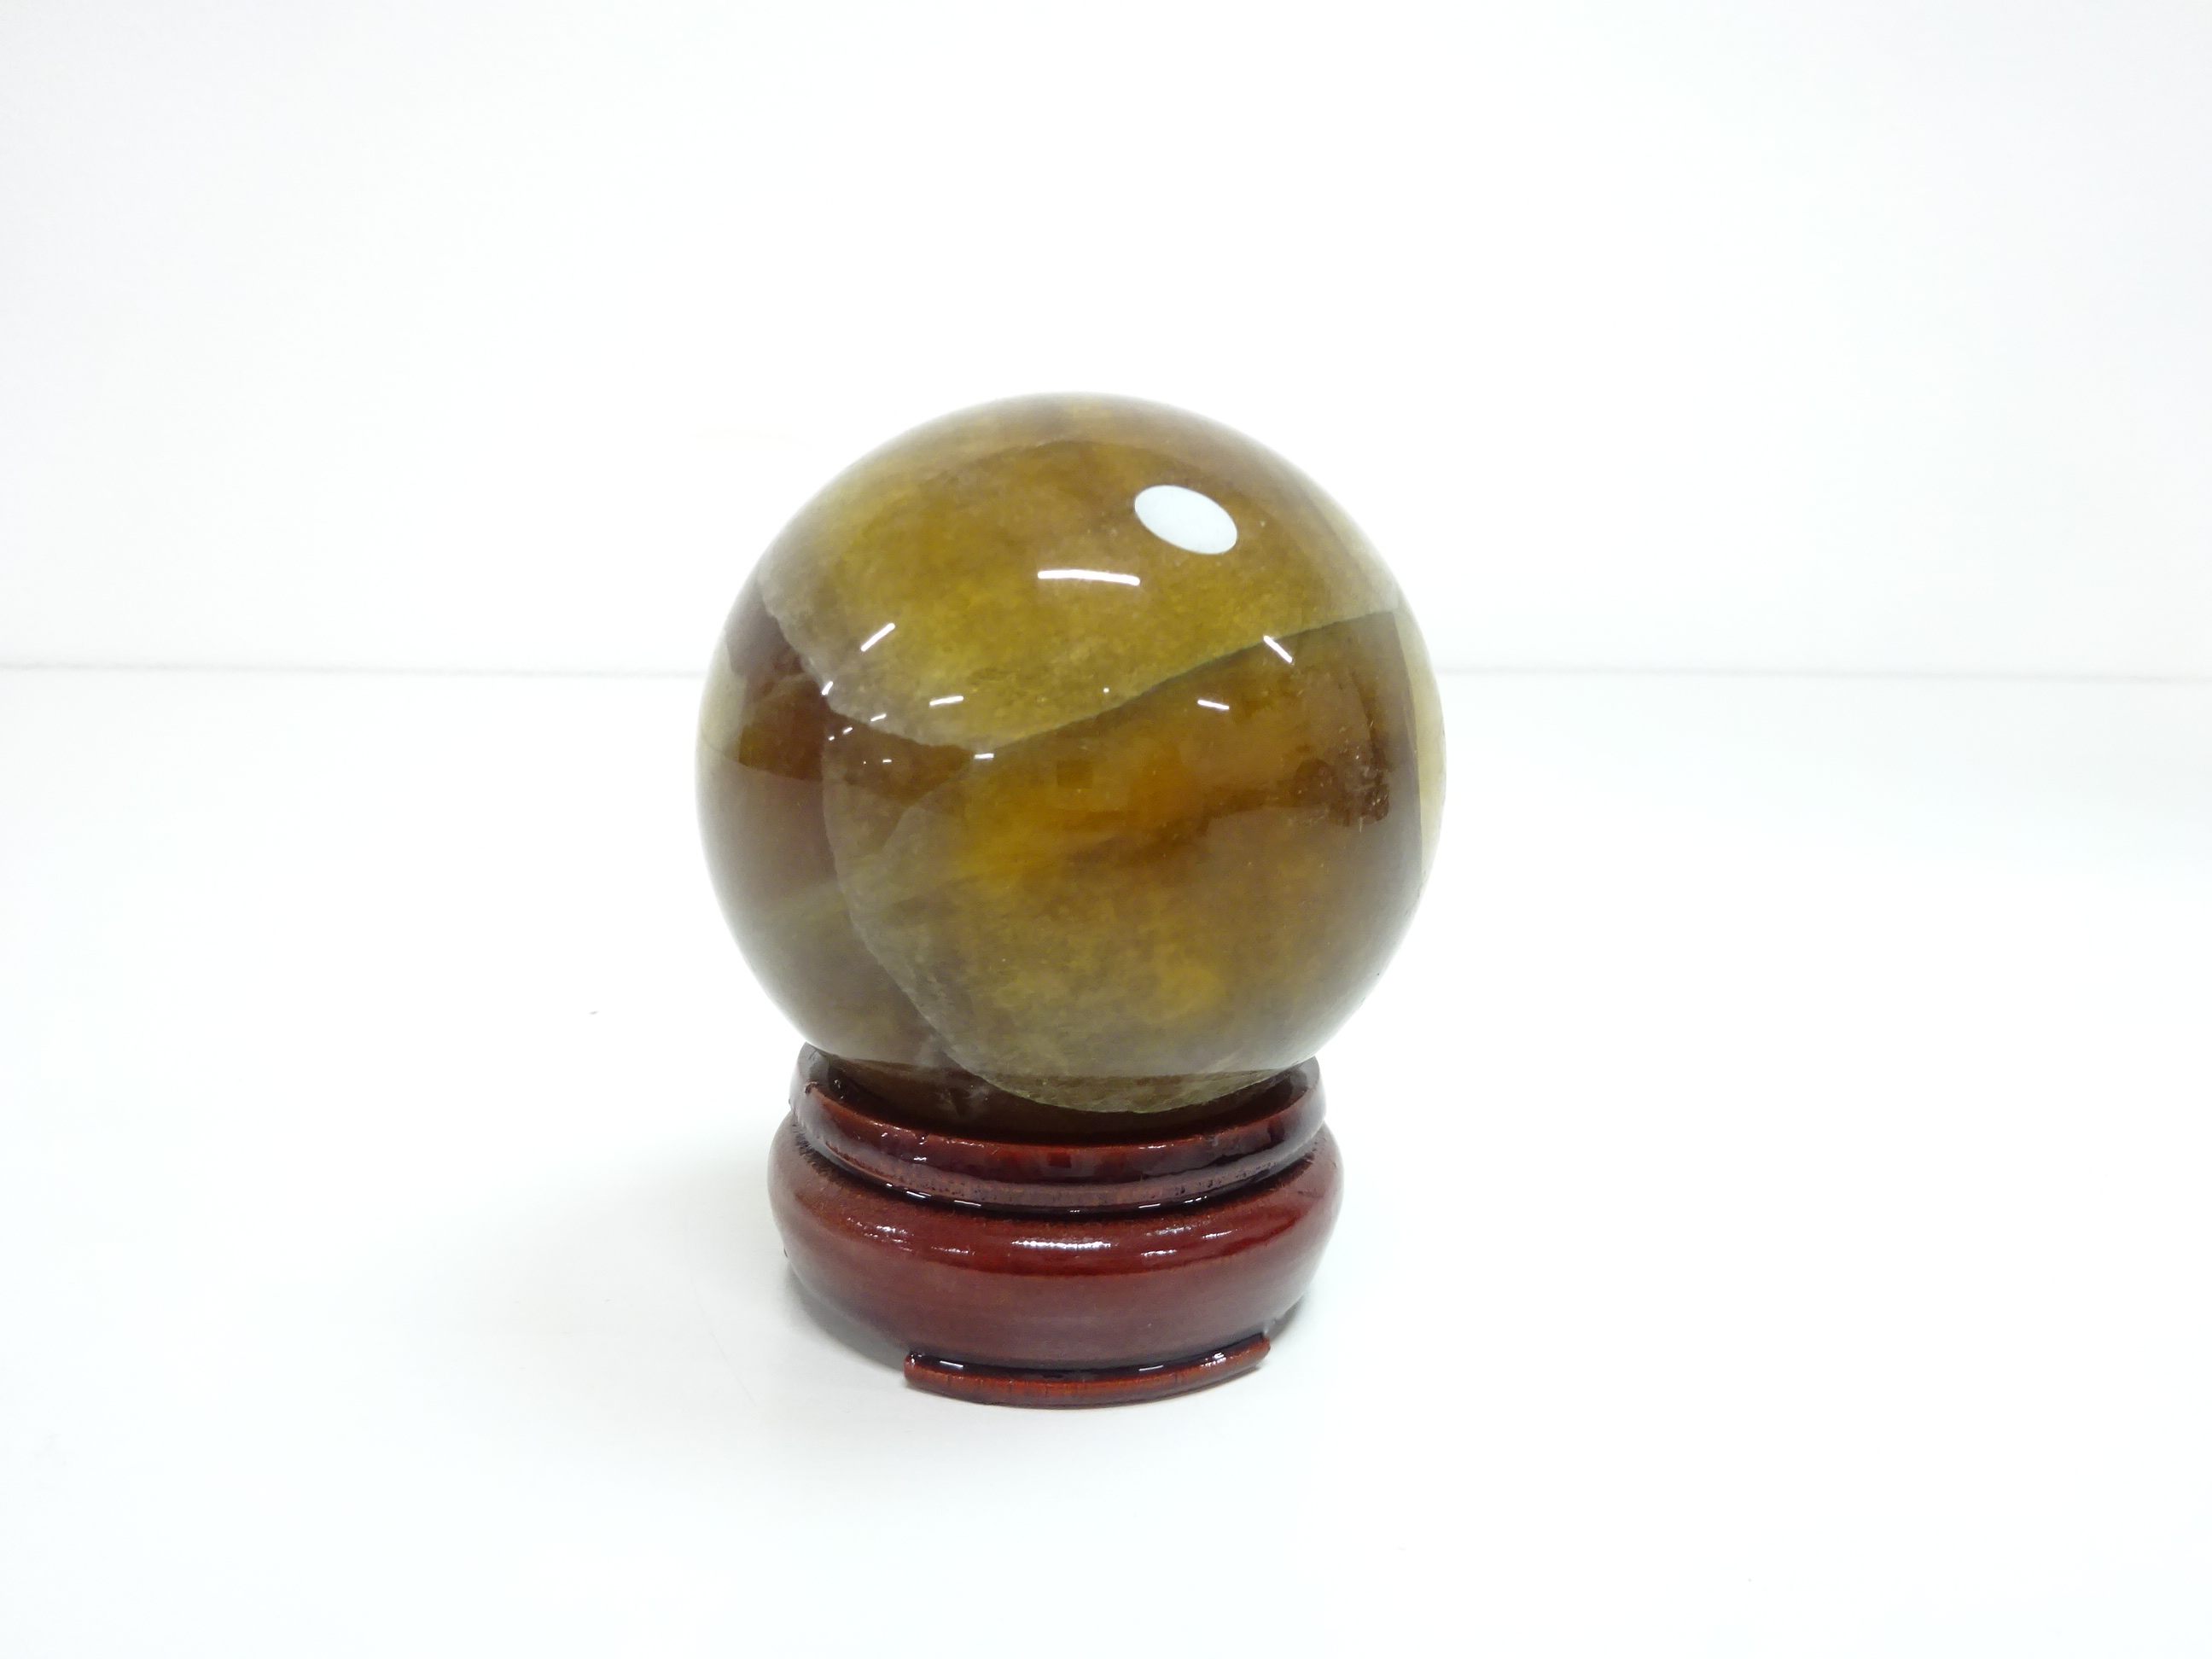 JAPANESE ORNAMENT / NATURAL CRYSTAL & MINERAL (510g) / HEALING CRYSTAL SPHERE